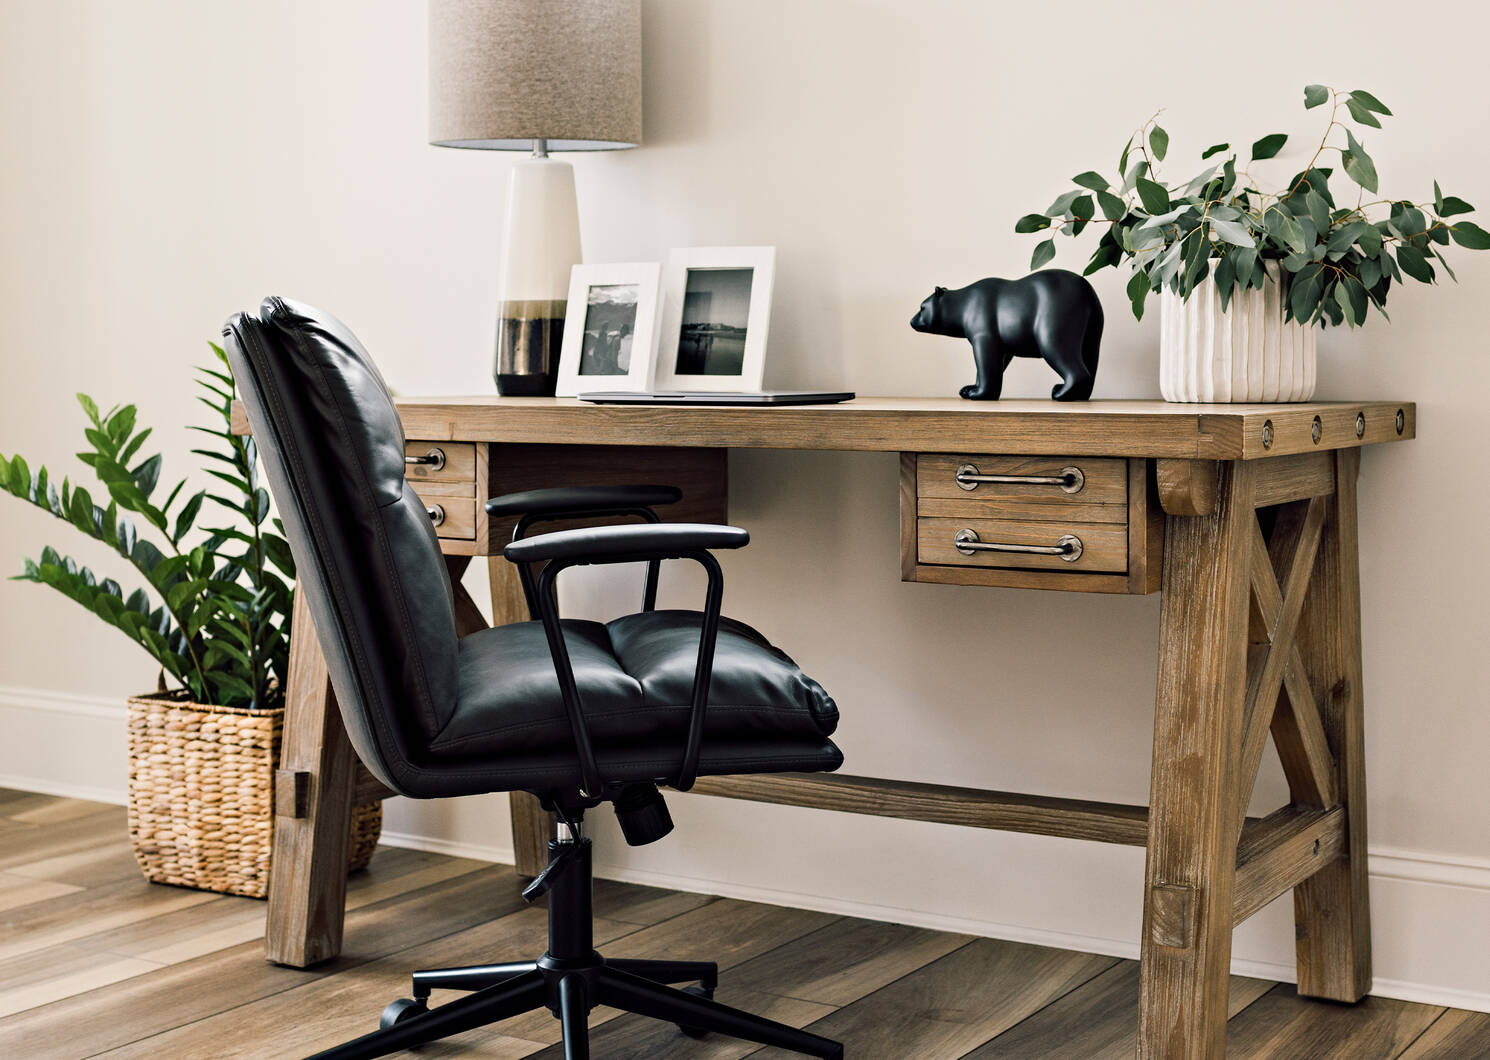 Titus Office Chair -Remo Coal